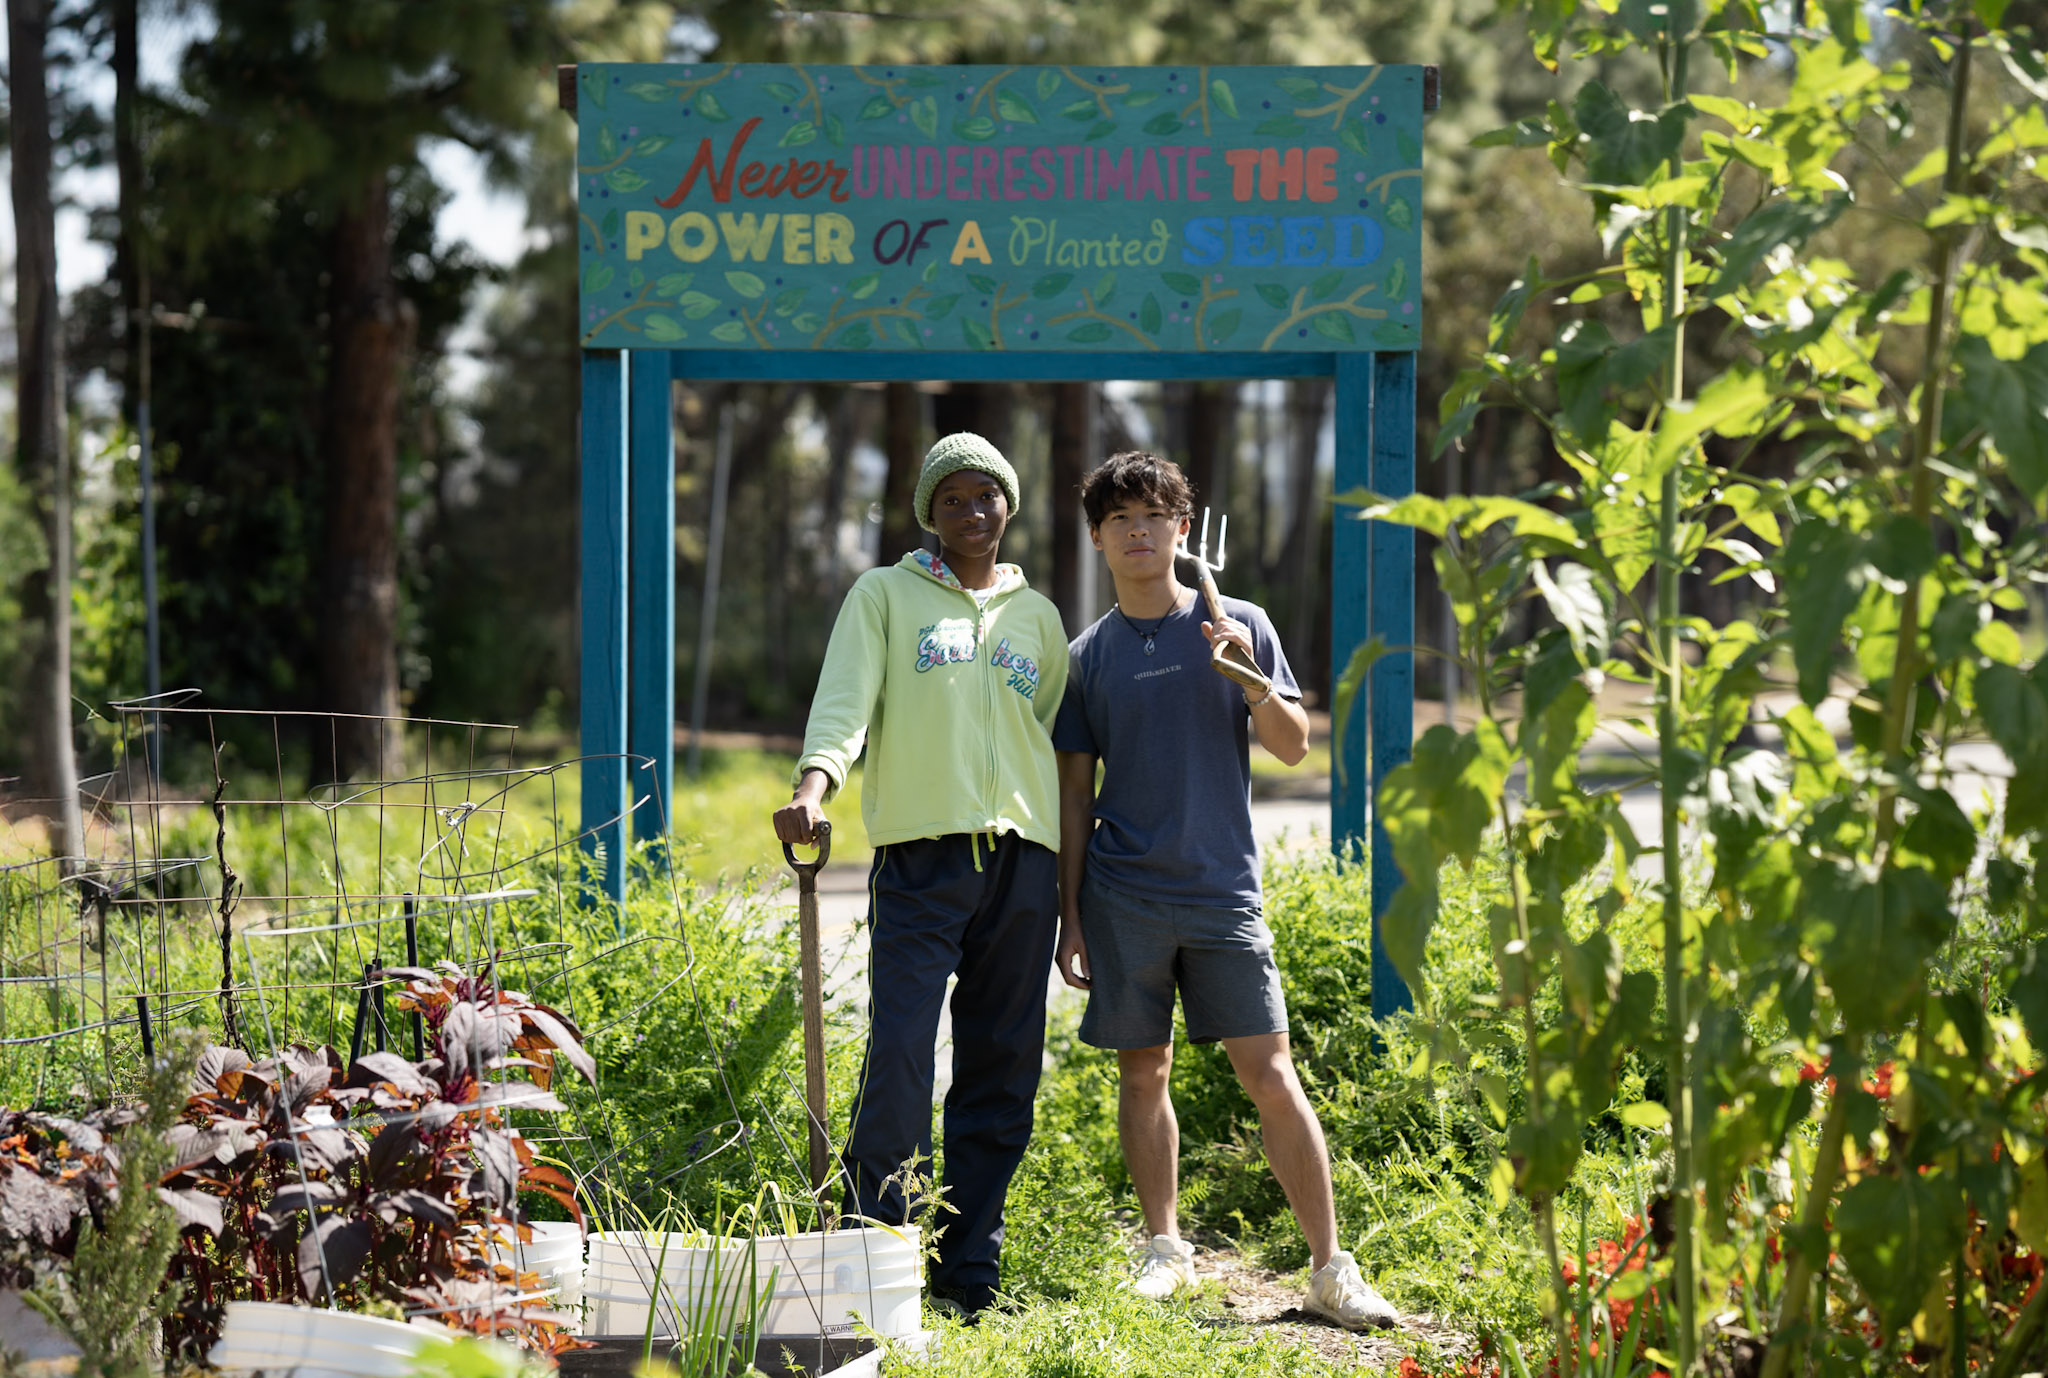 two student interns hold gardening equipment while posing in front of a sign that reads "never underestimate the power of a planet seed" in a vibrant garden